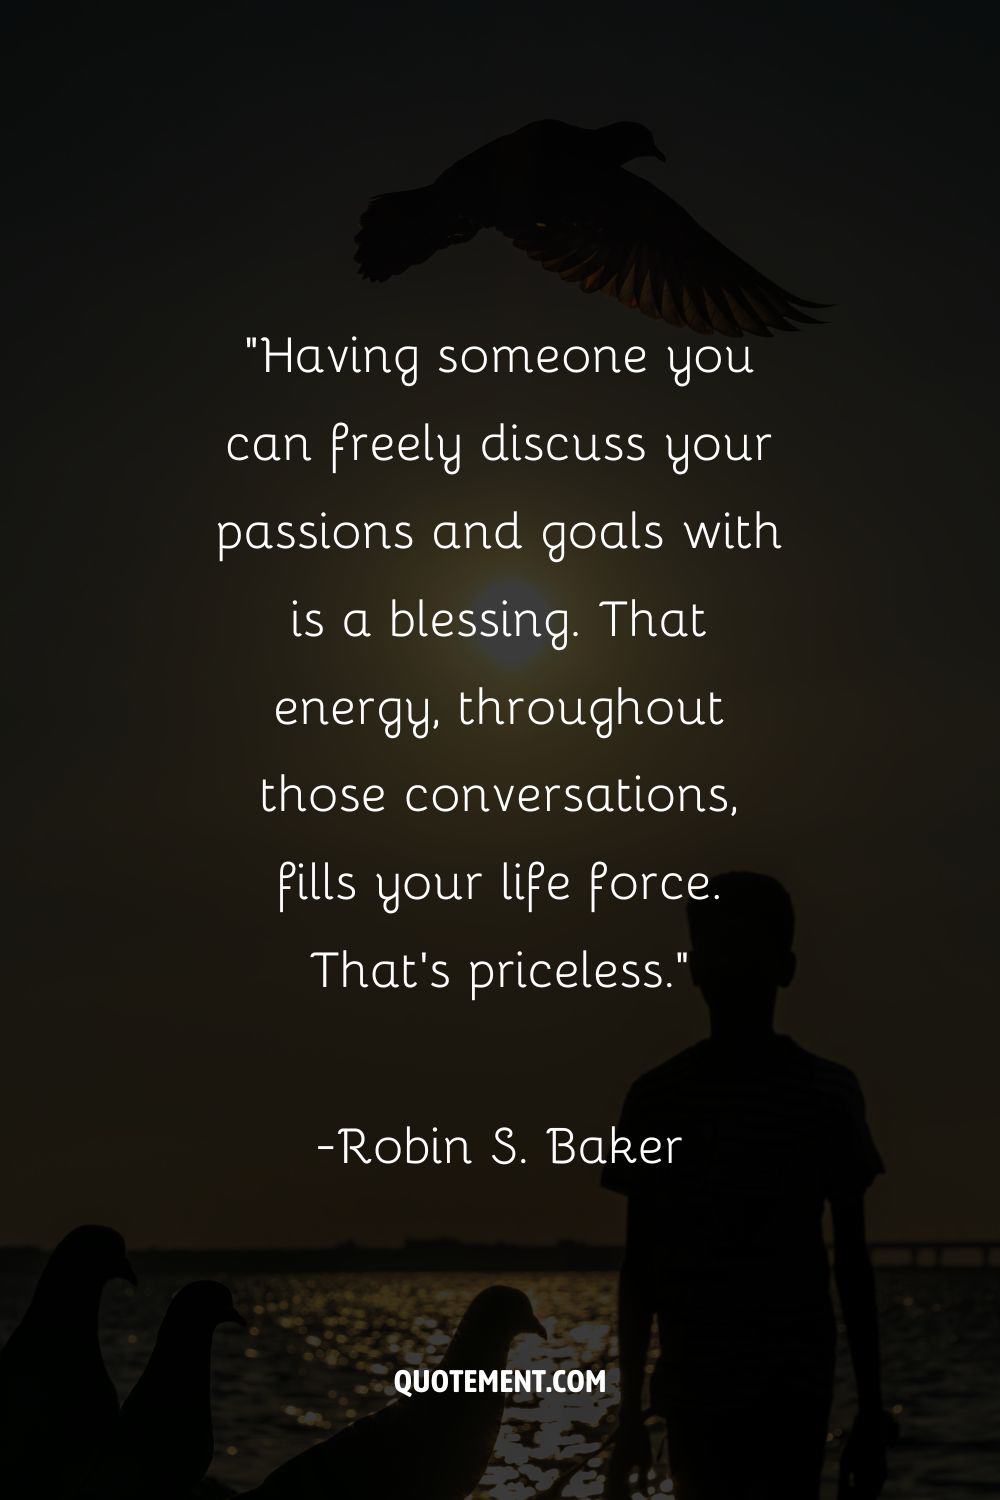 Having someone you can freely discuss your passions and goals with is a blessing. That energy, throughout those conversations, fills your life force. That's priceless.